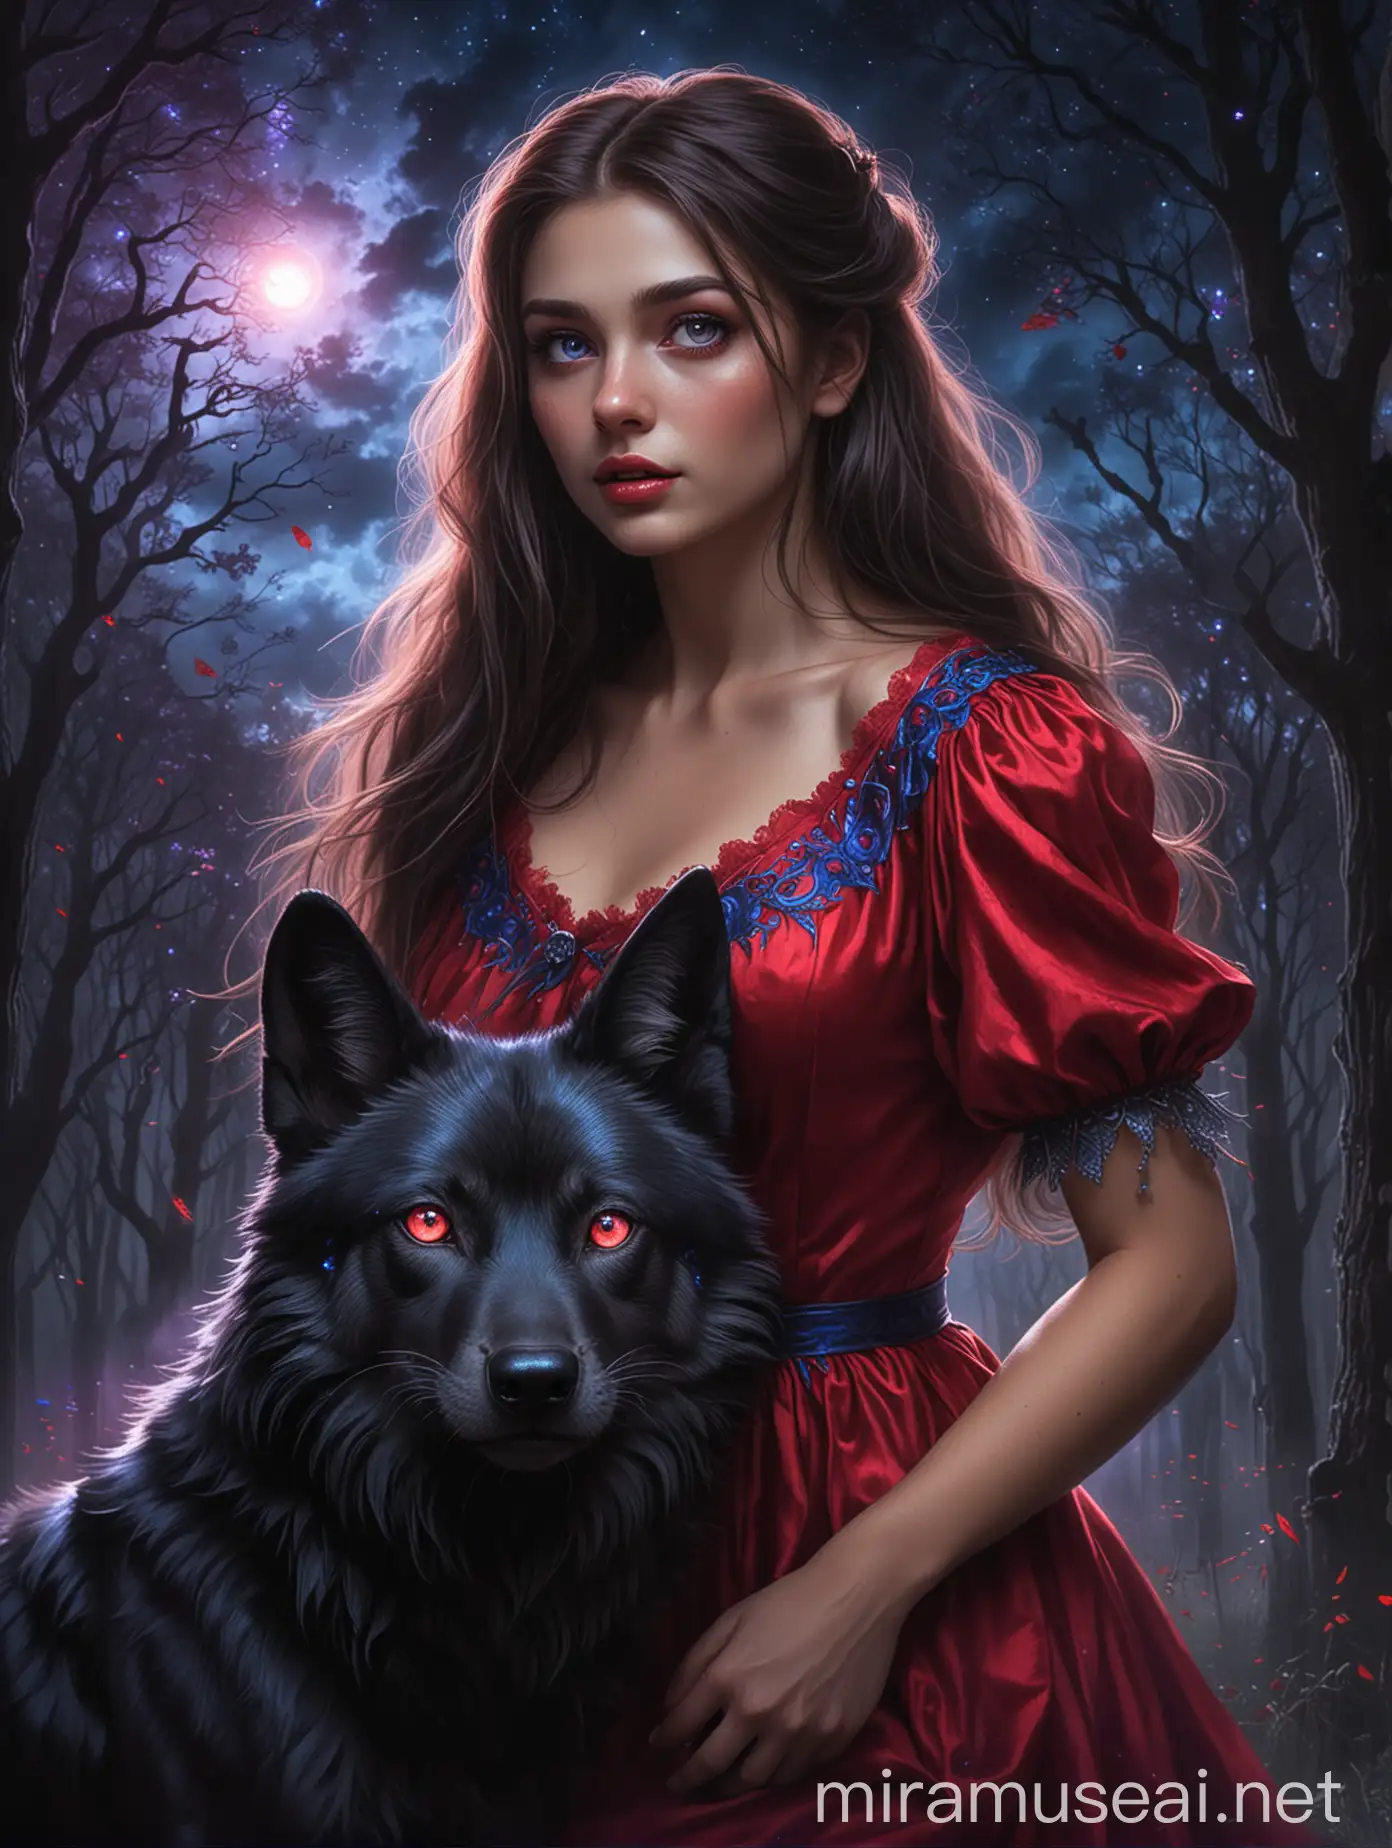 Elegant Lady in Red and Blue Dress Gazing at Starlit Sky with Mysterious Wolf